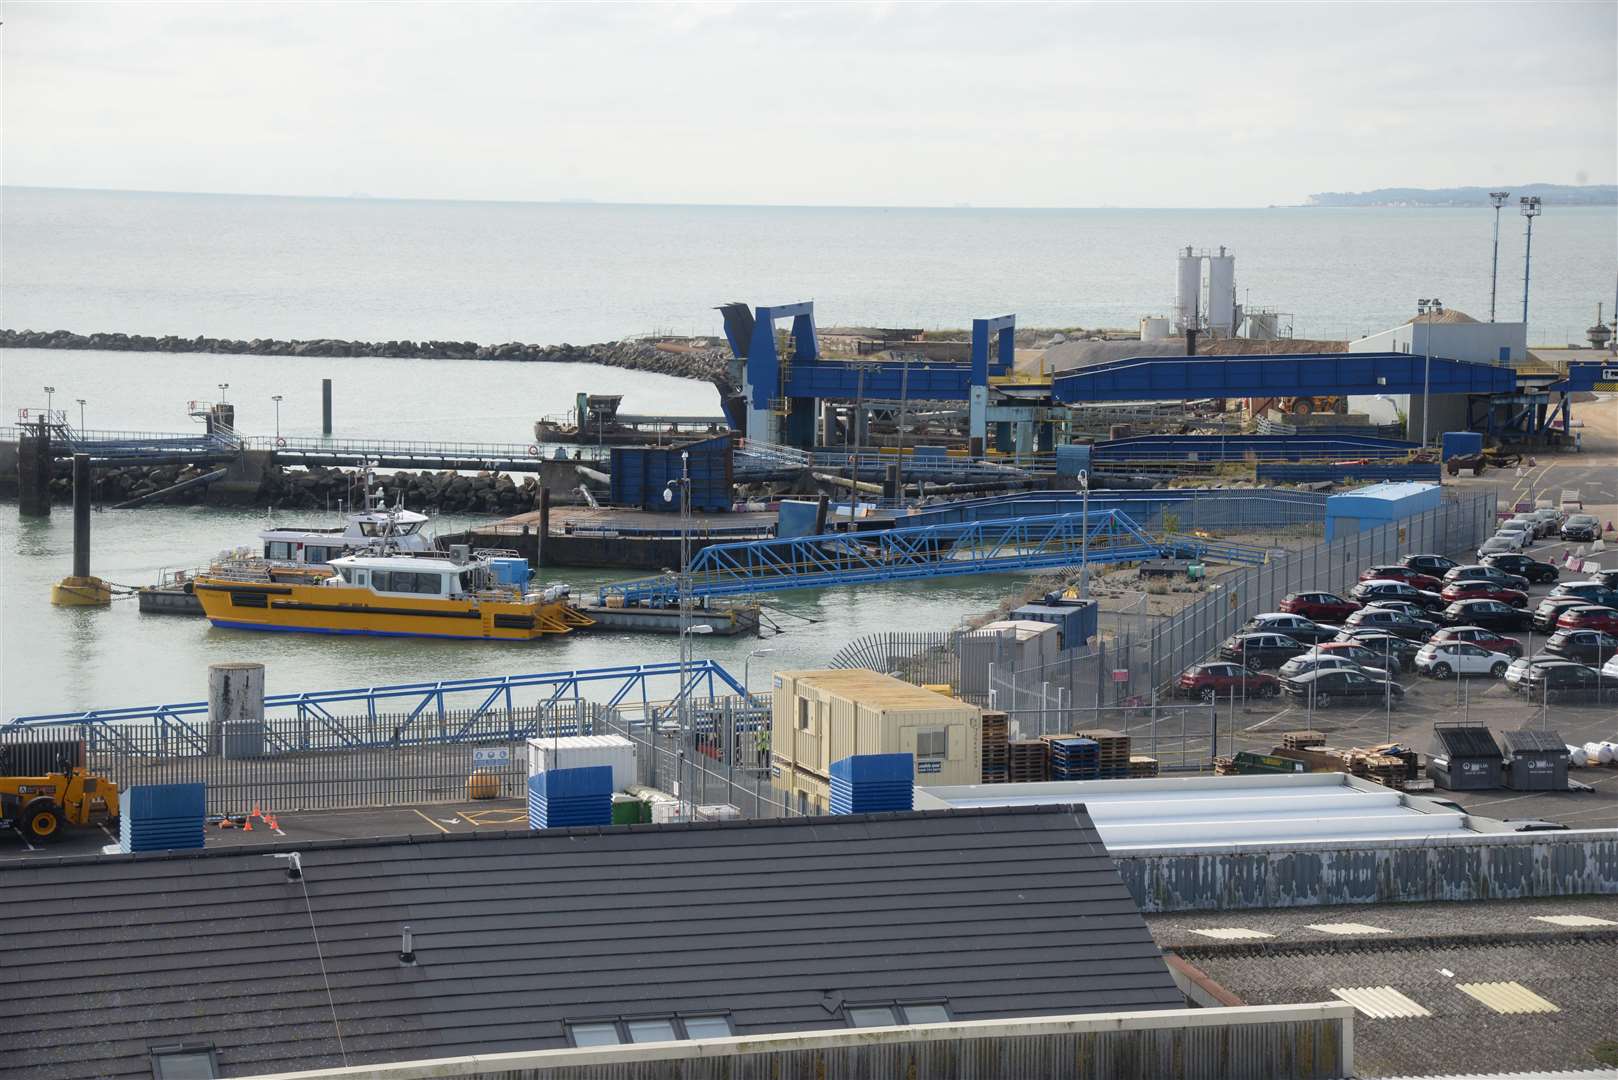 The Port of Ramsgate has lost millions of pounds over the last decade - but could a freeport reverse its fortunes?